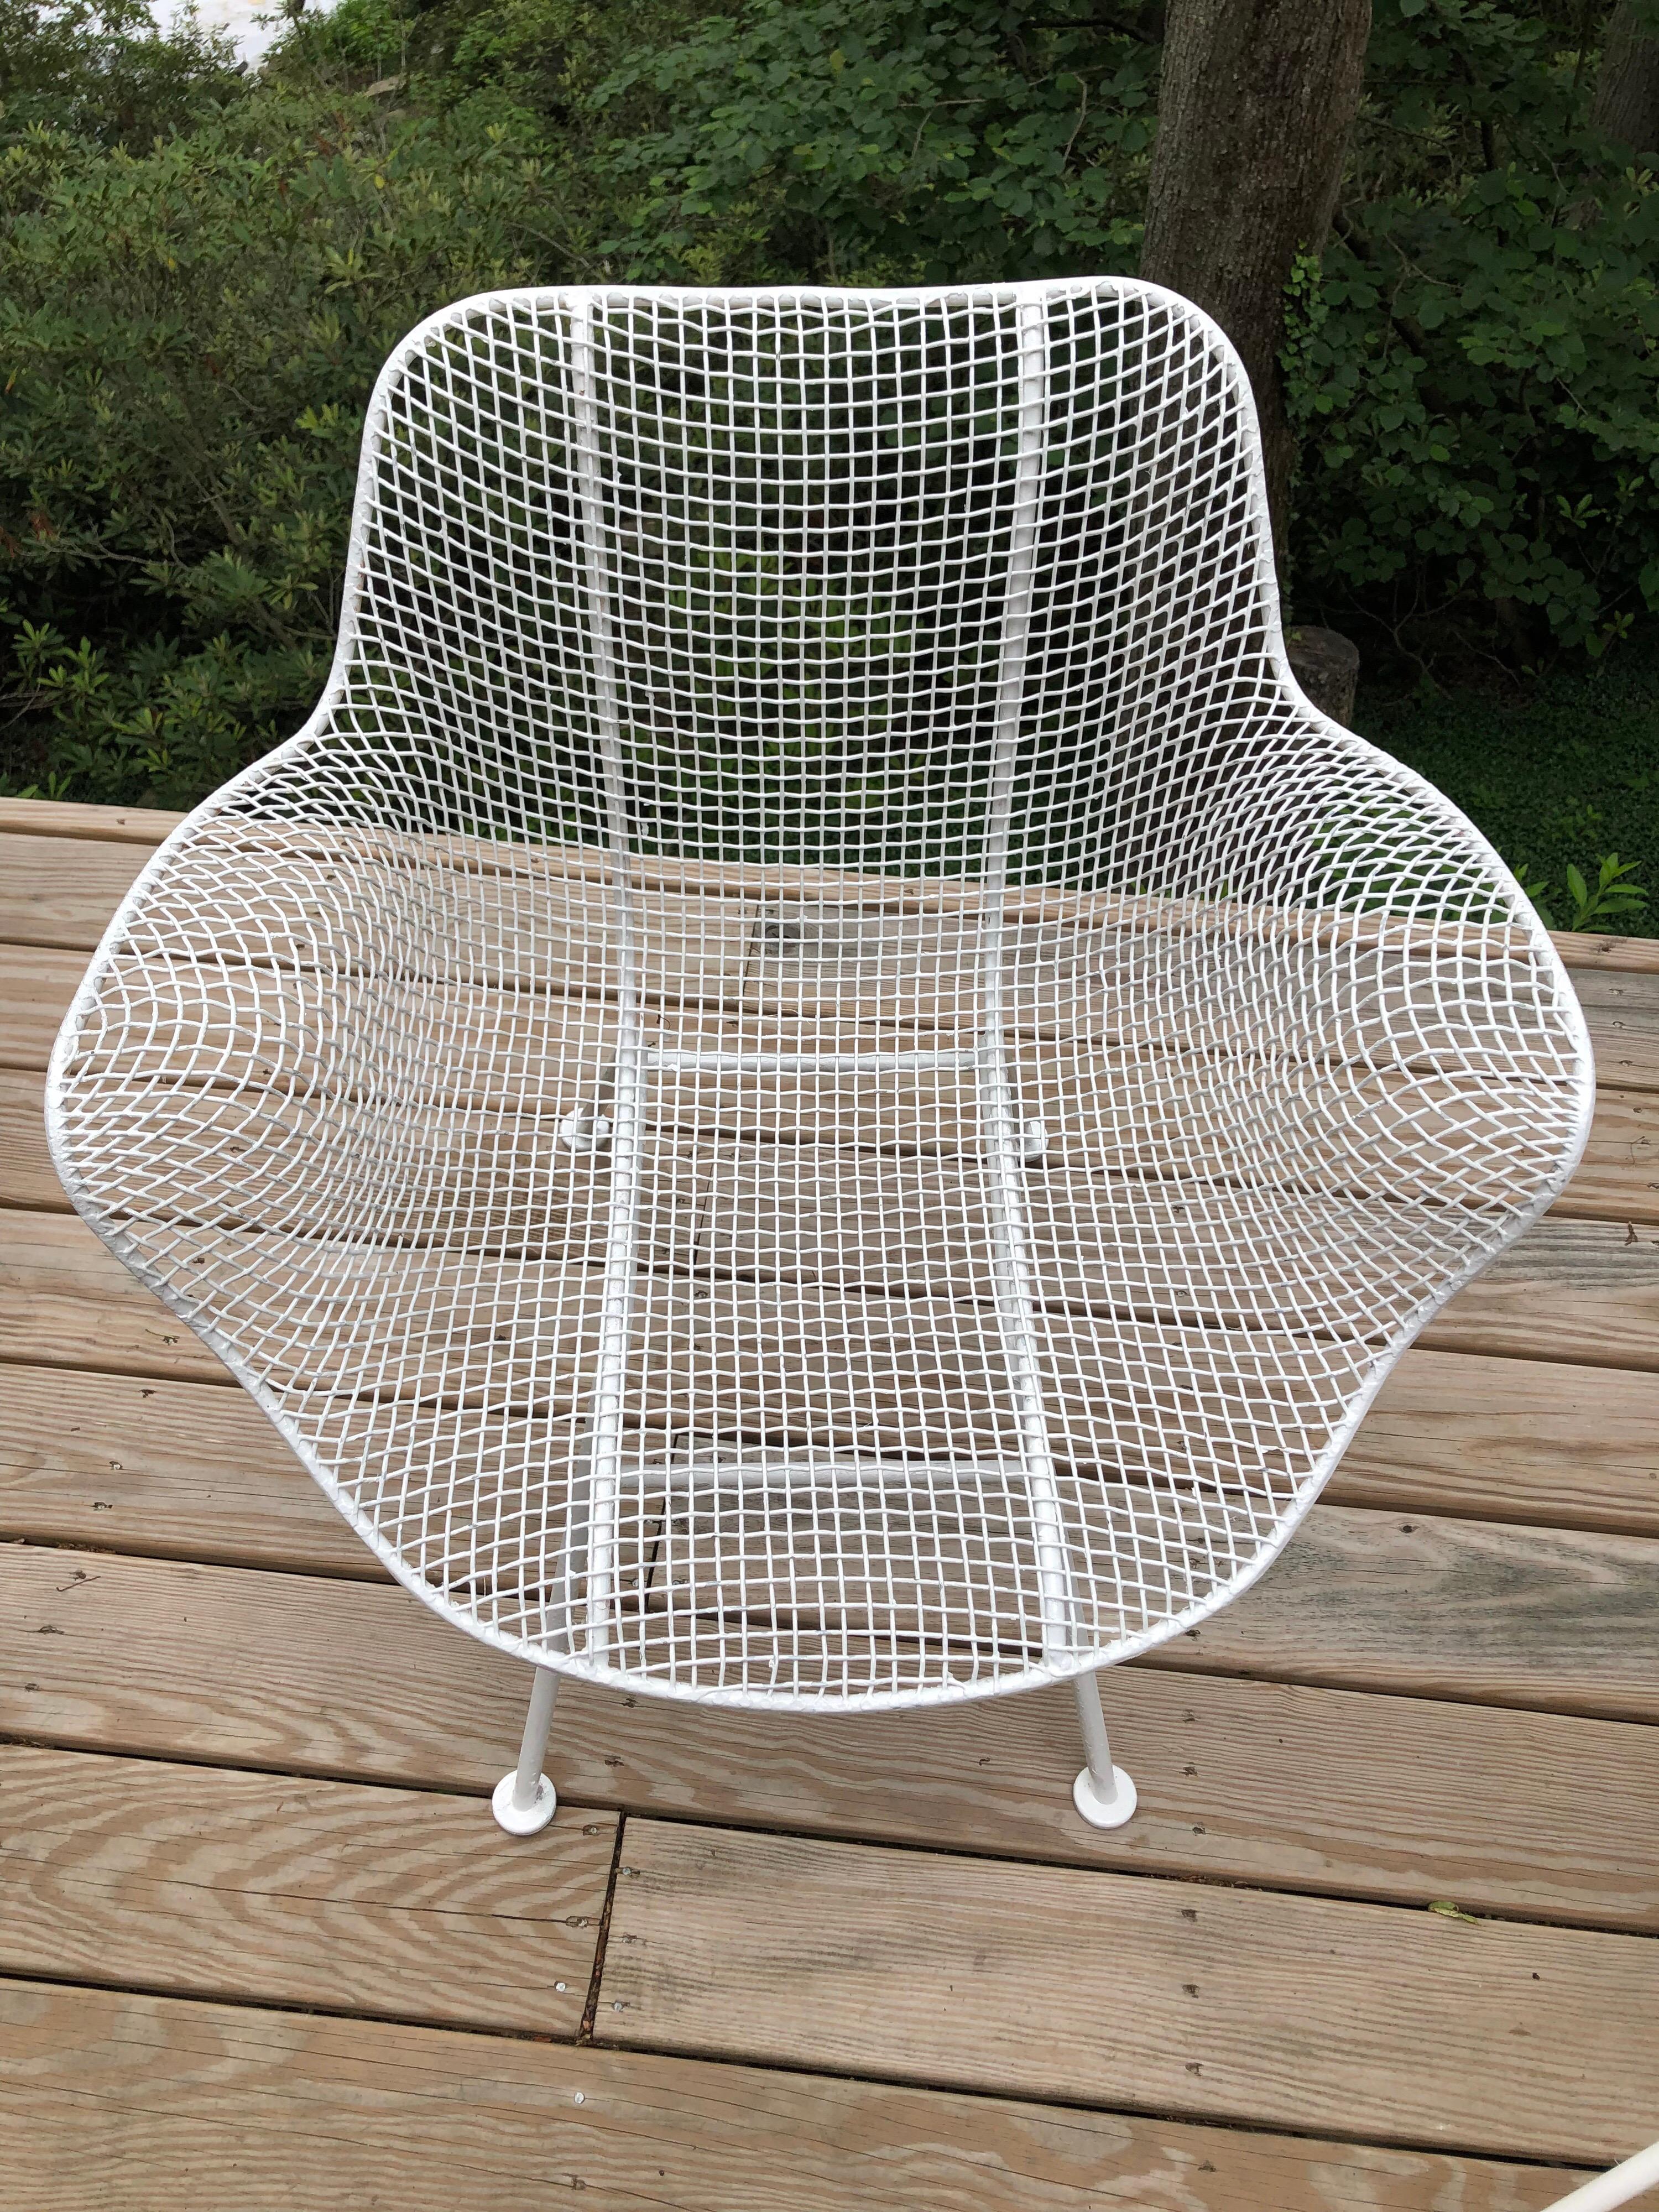 American Set of 6 Mid-Century Modern Wire Mesh Sculptura Dining Chairs by Russell Woodard